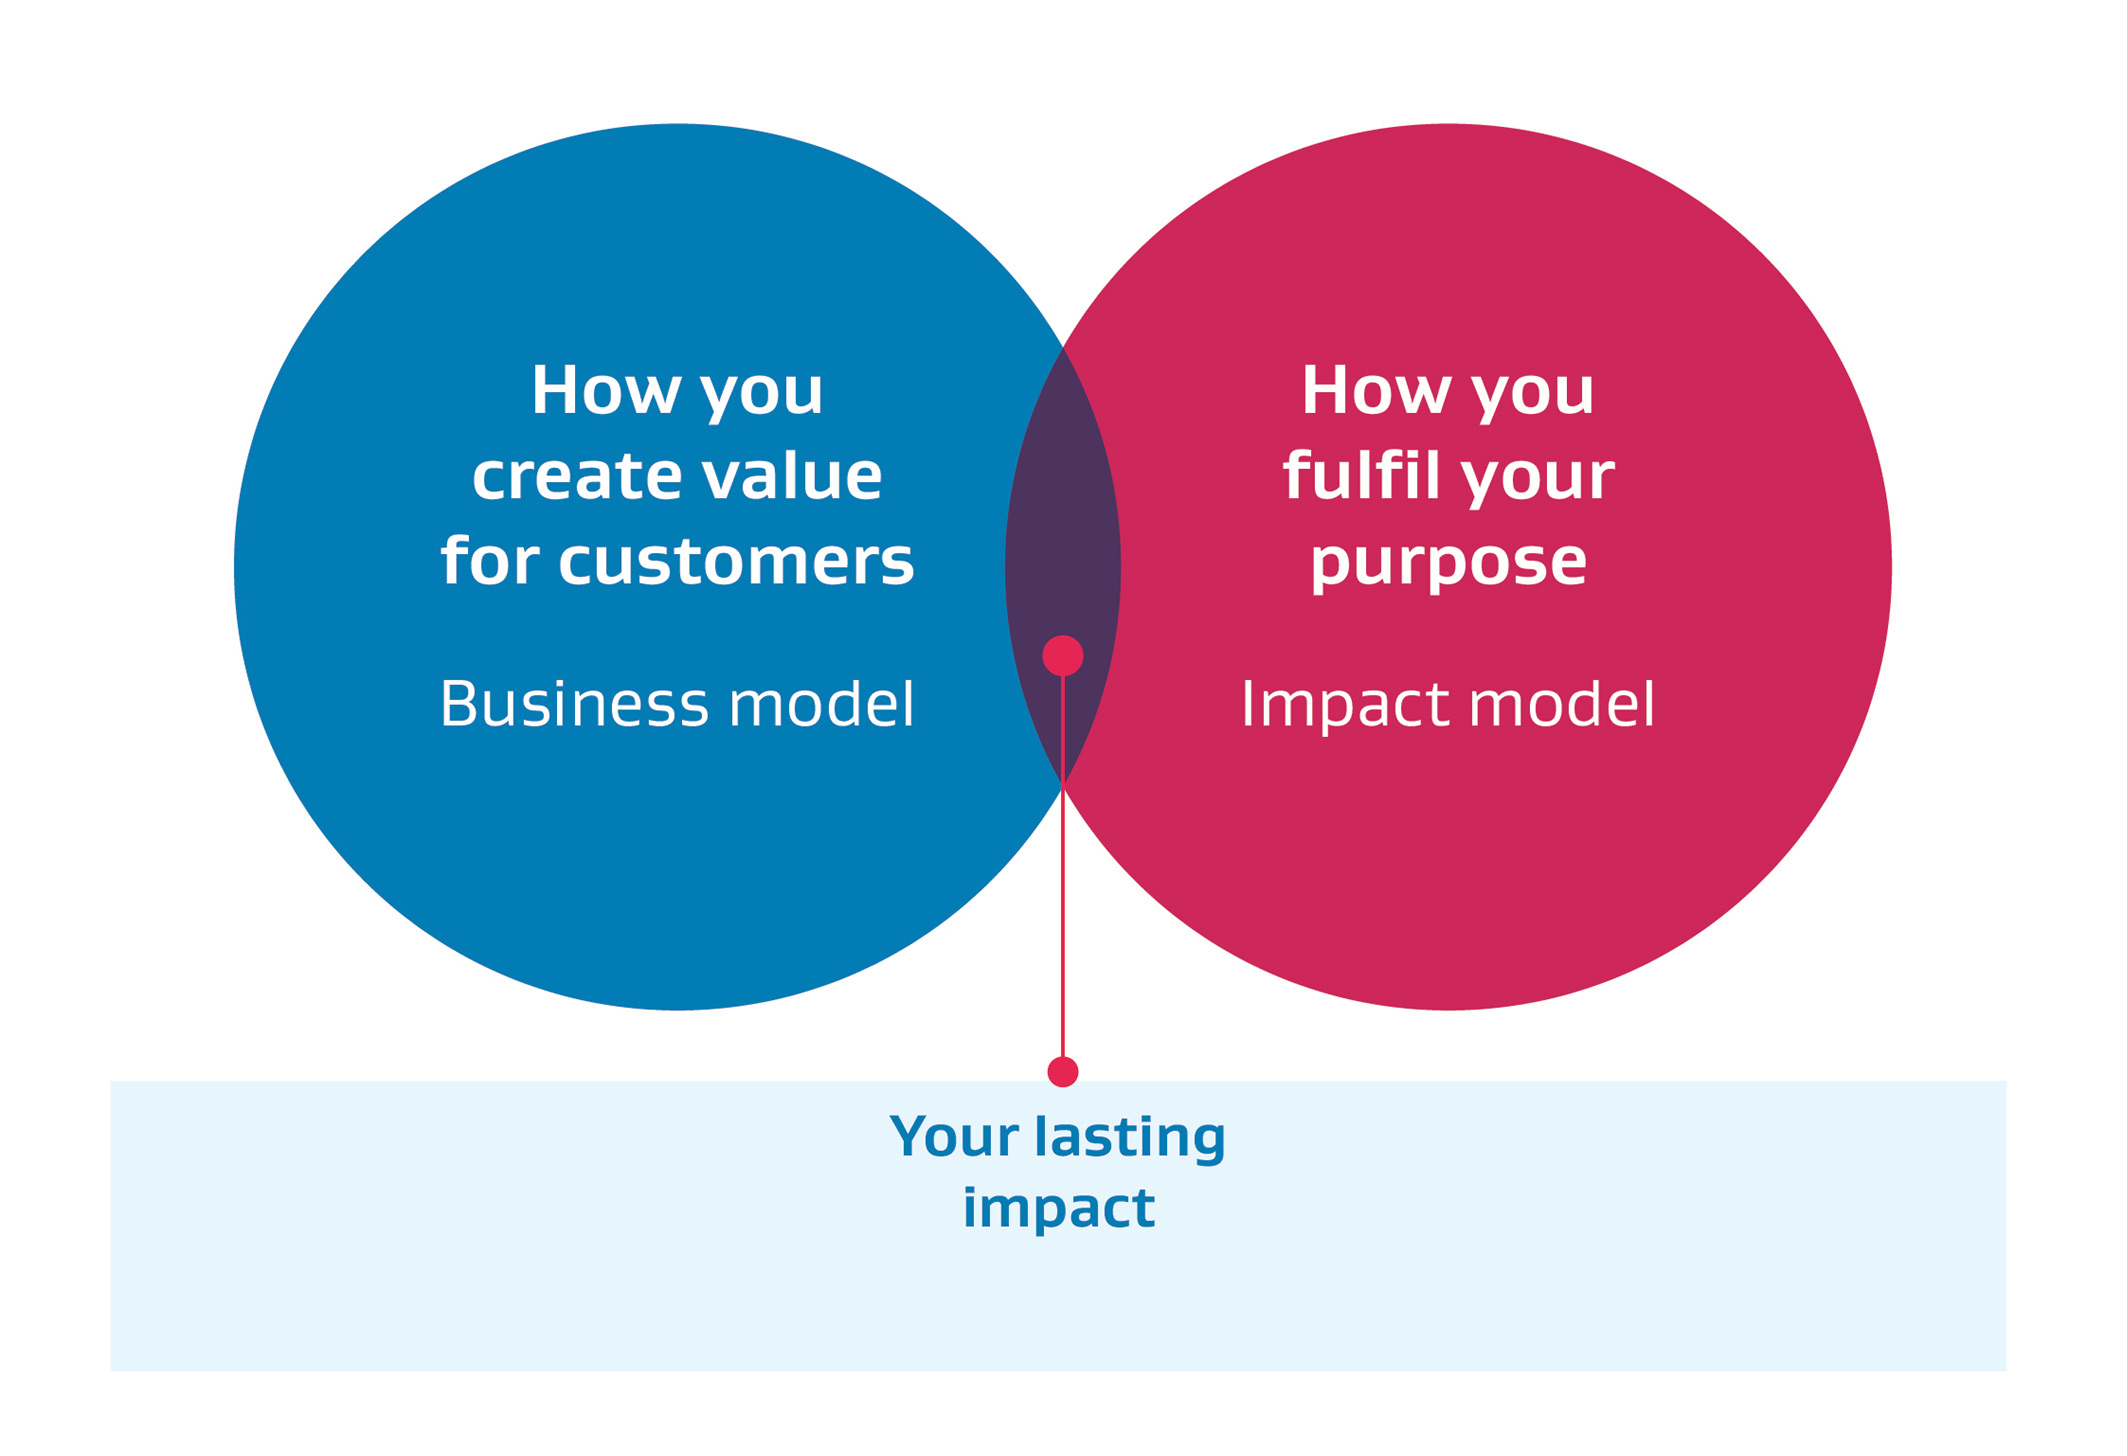 A venn diagram showing that any purpose-led business must have the elements of a business model (how to make money) as well as an impact model (how to make a difference).